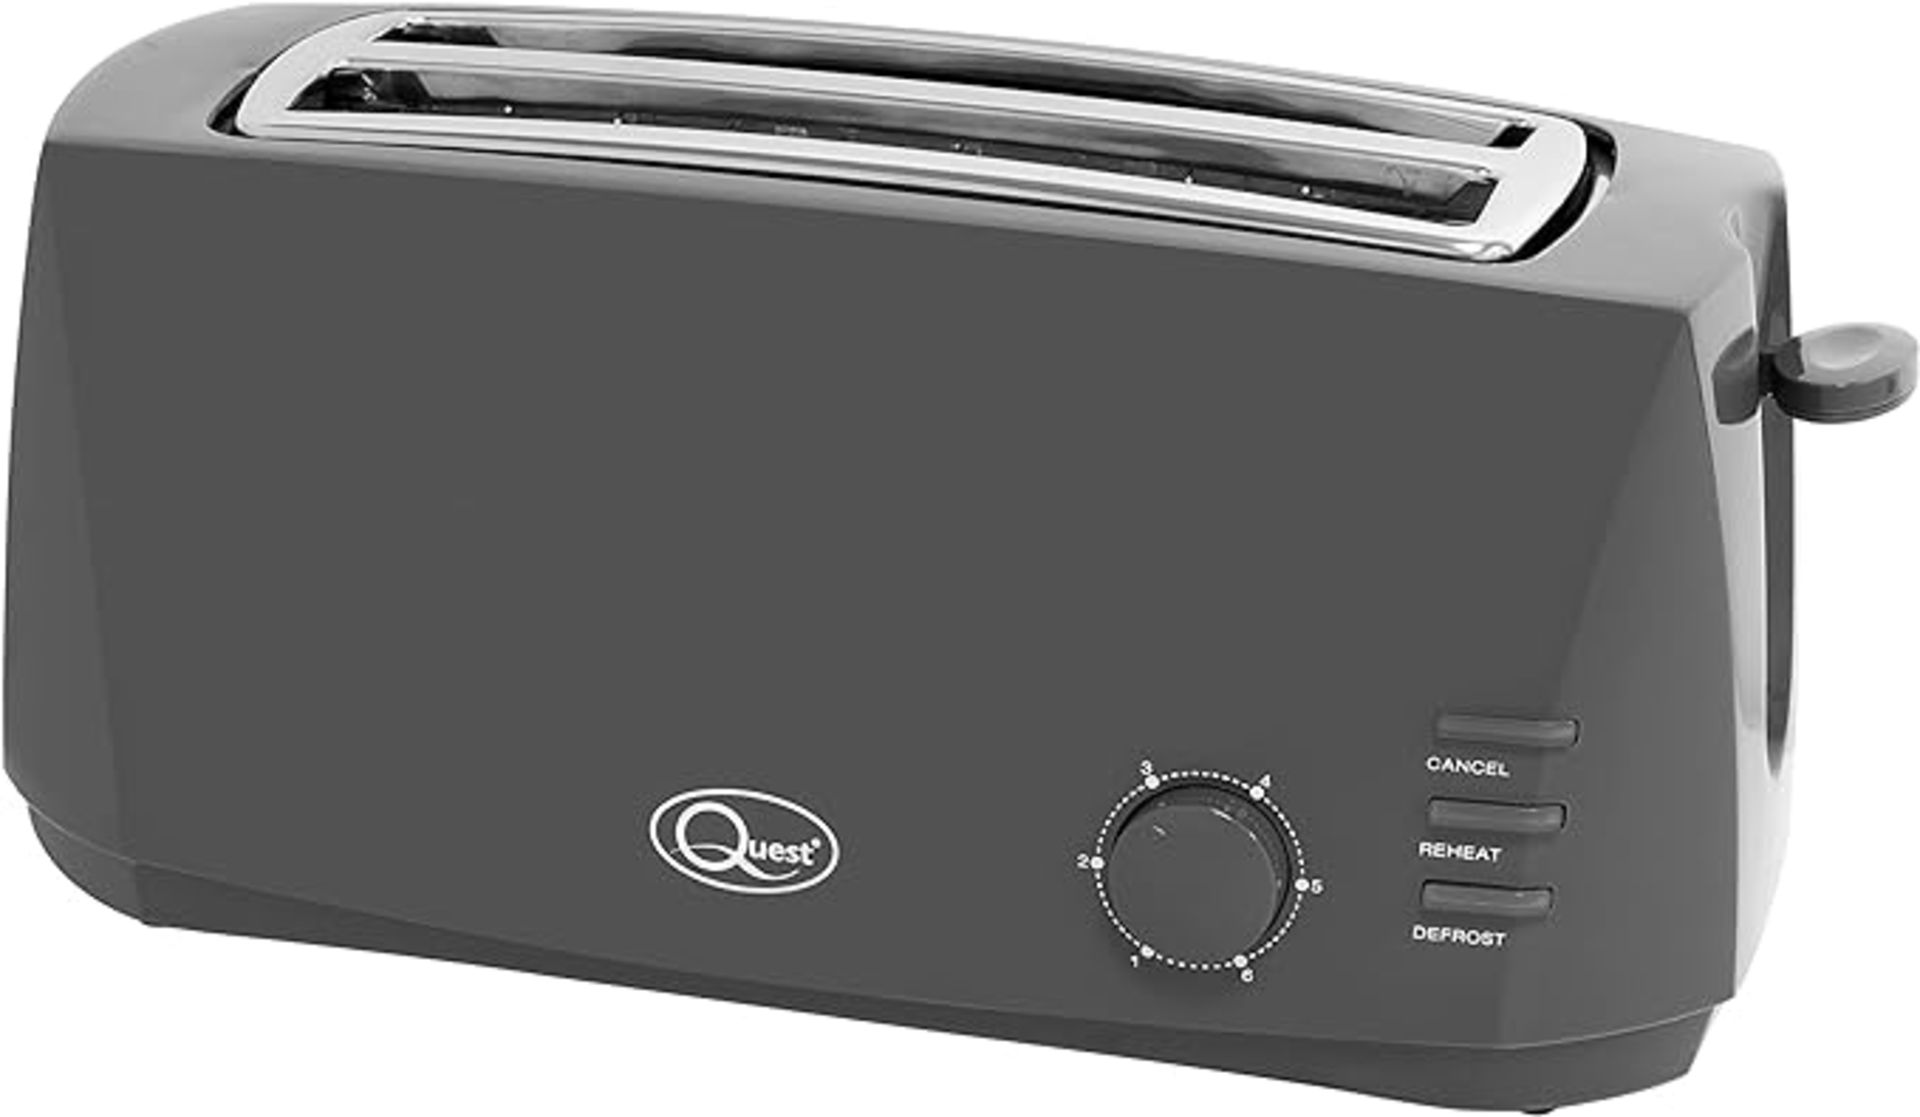 Quest 4 Slice Toaster Grey - Extra Wide Long Slots for Crumpets and Bagels - 6 Settings - Reheat and